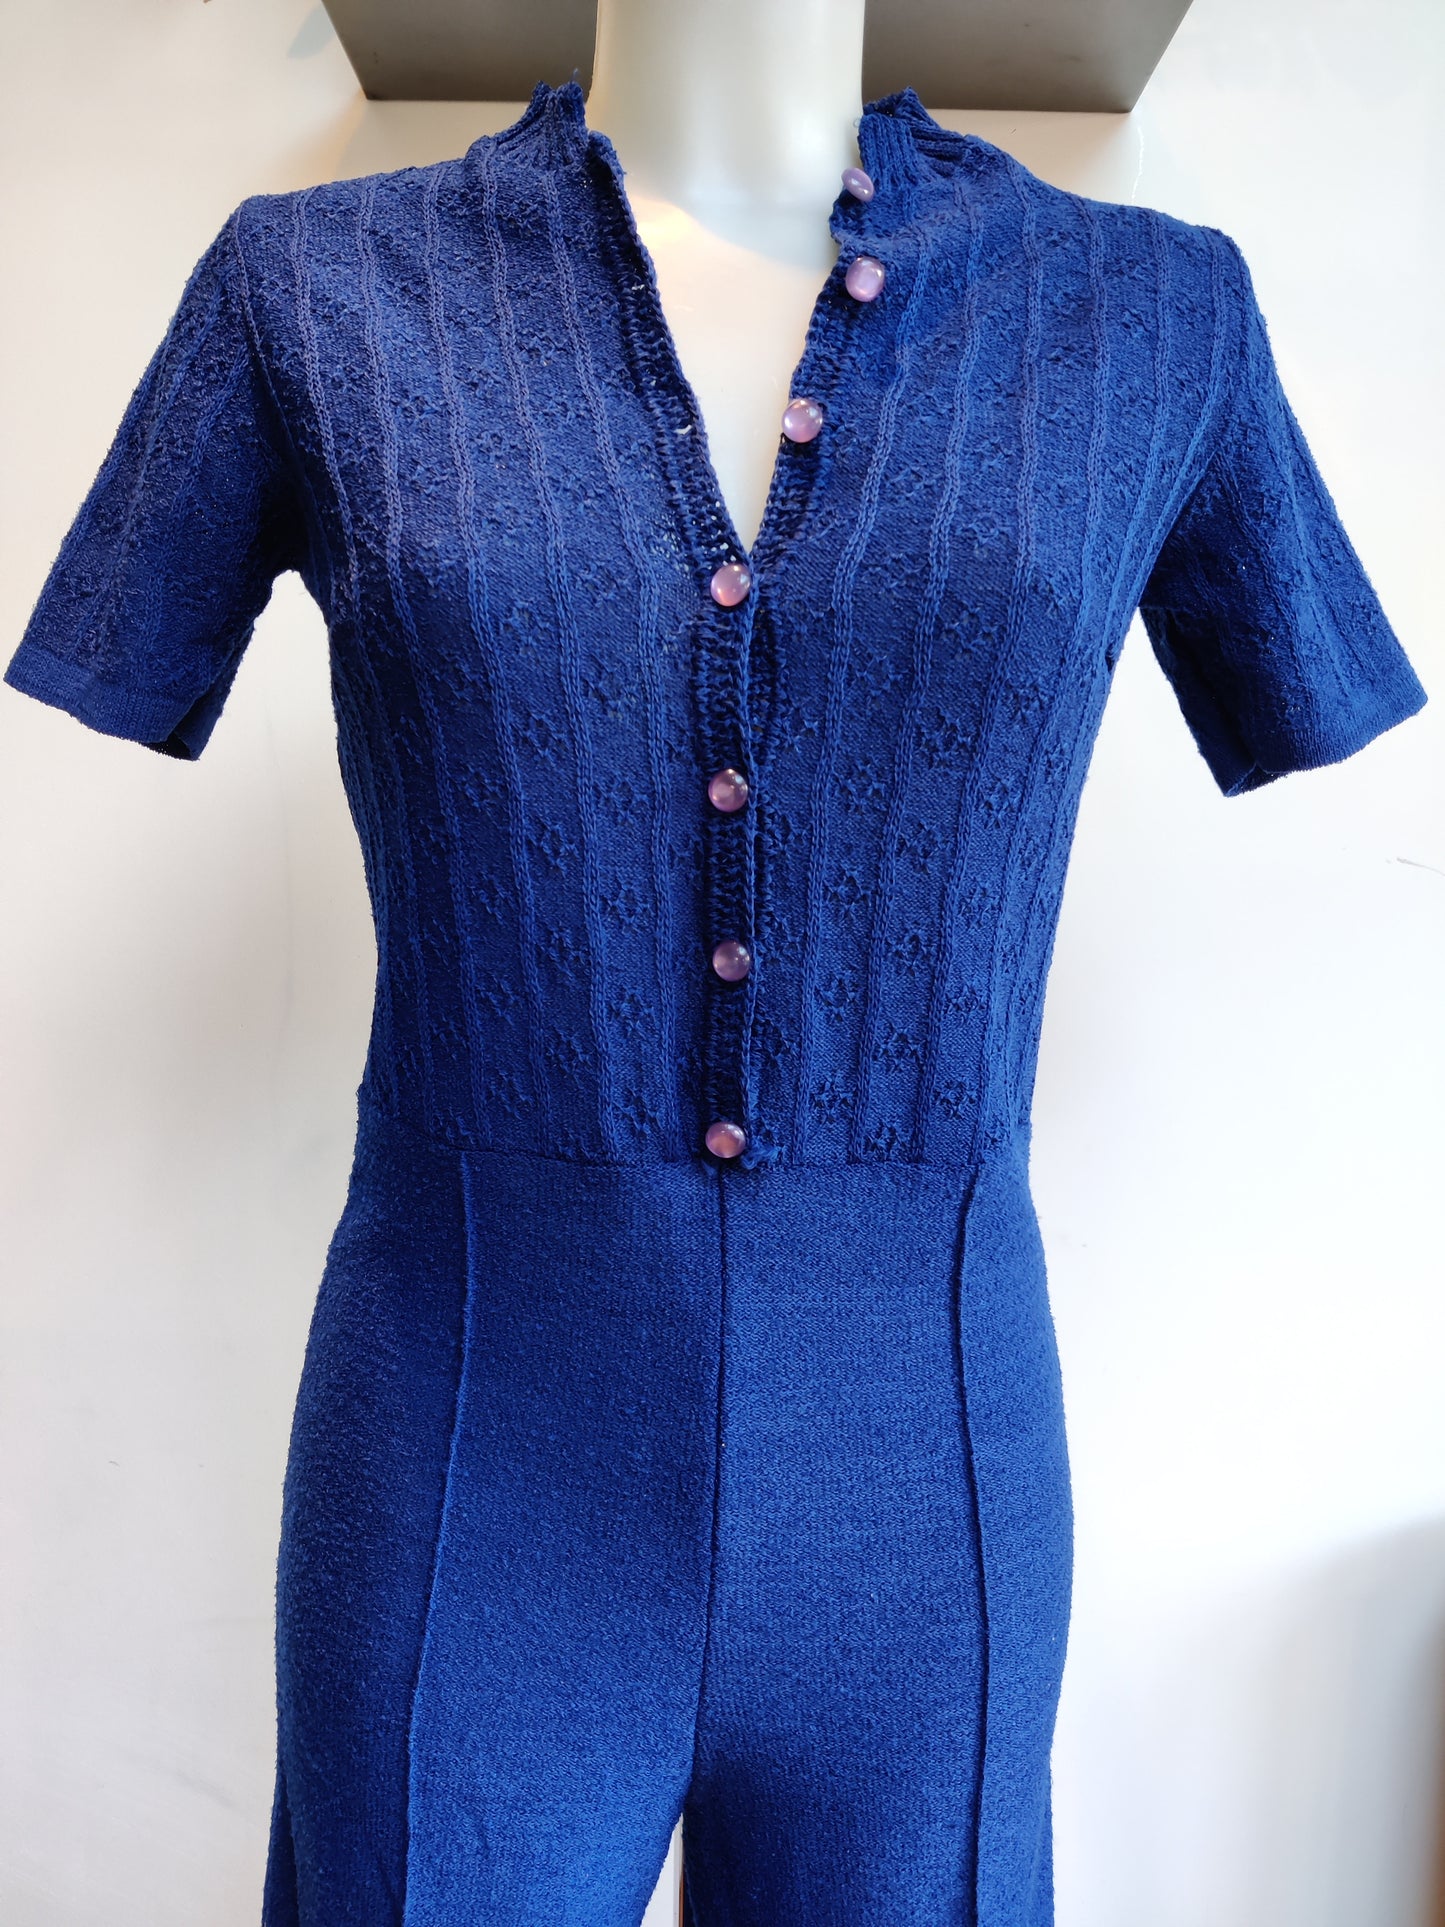 Small vintage jumpsuit in blue button down knit